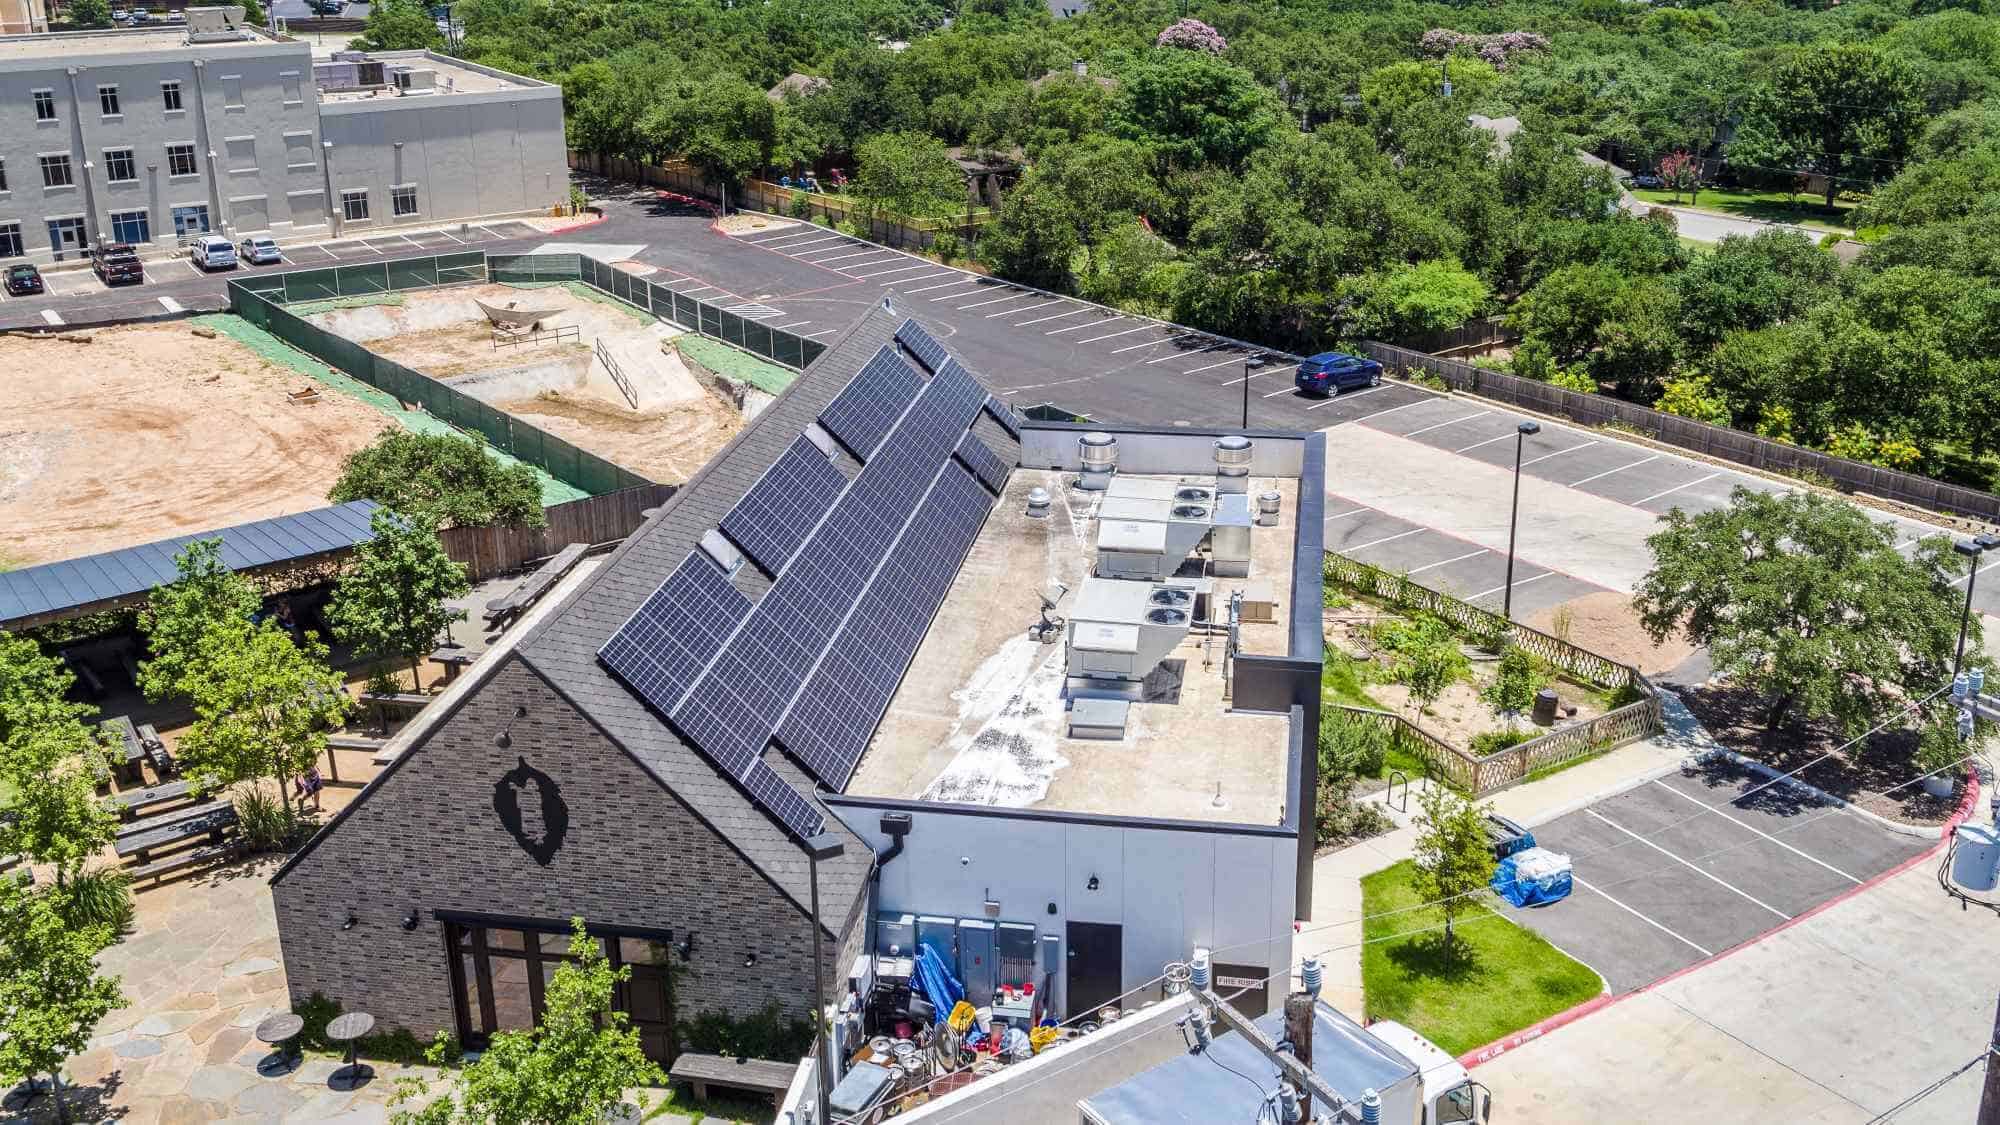 Aerial view of Hoppy Monk restaurant in San Antonio, Texas with solar panels installed on the roof